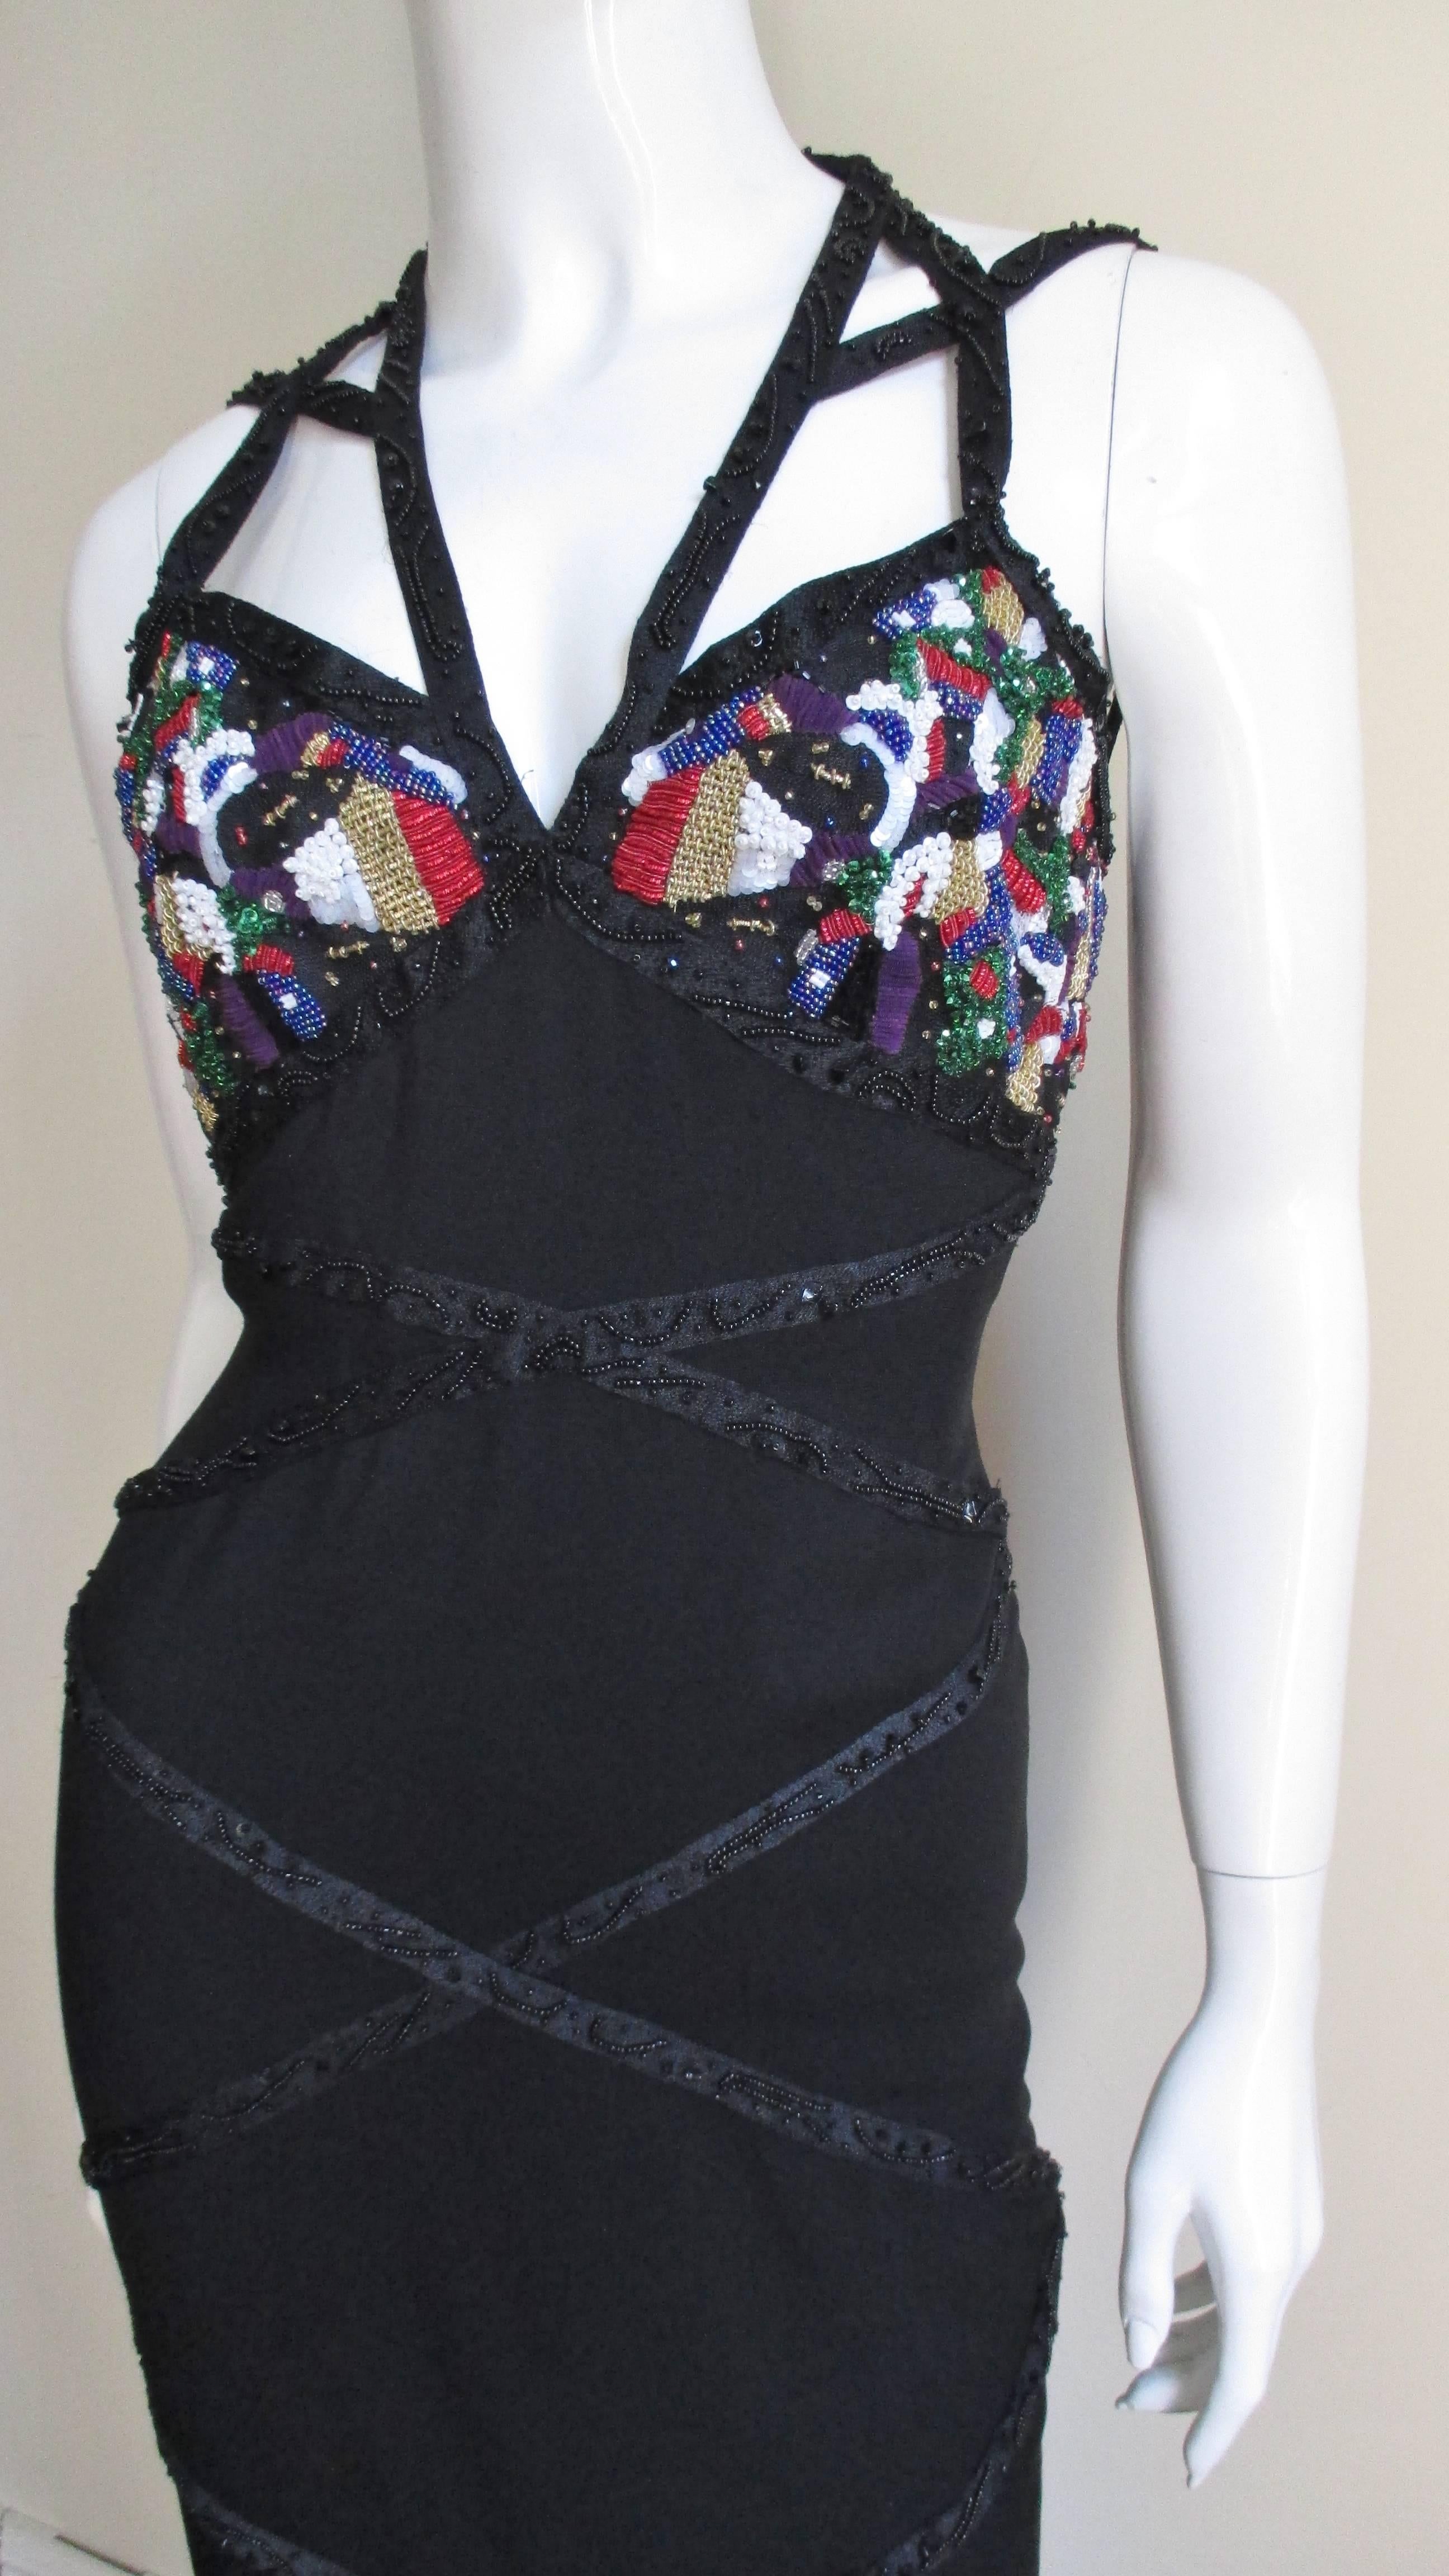  Karl Lagerfeld Silk SS 1993 Ad Campaign Halter Gown with Beading In Excellent Condition For Sale In Water Mill, NY